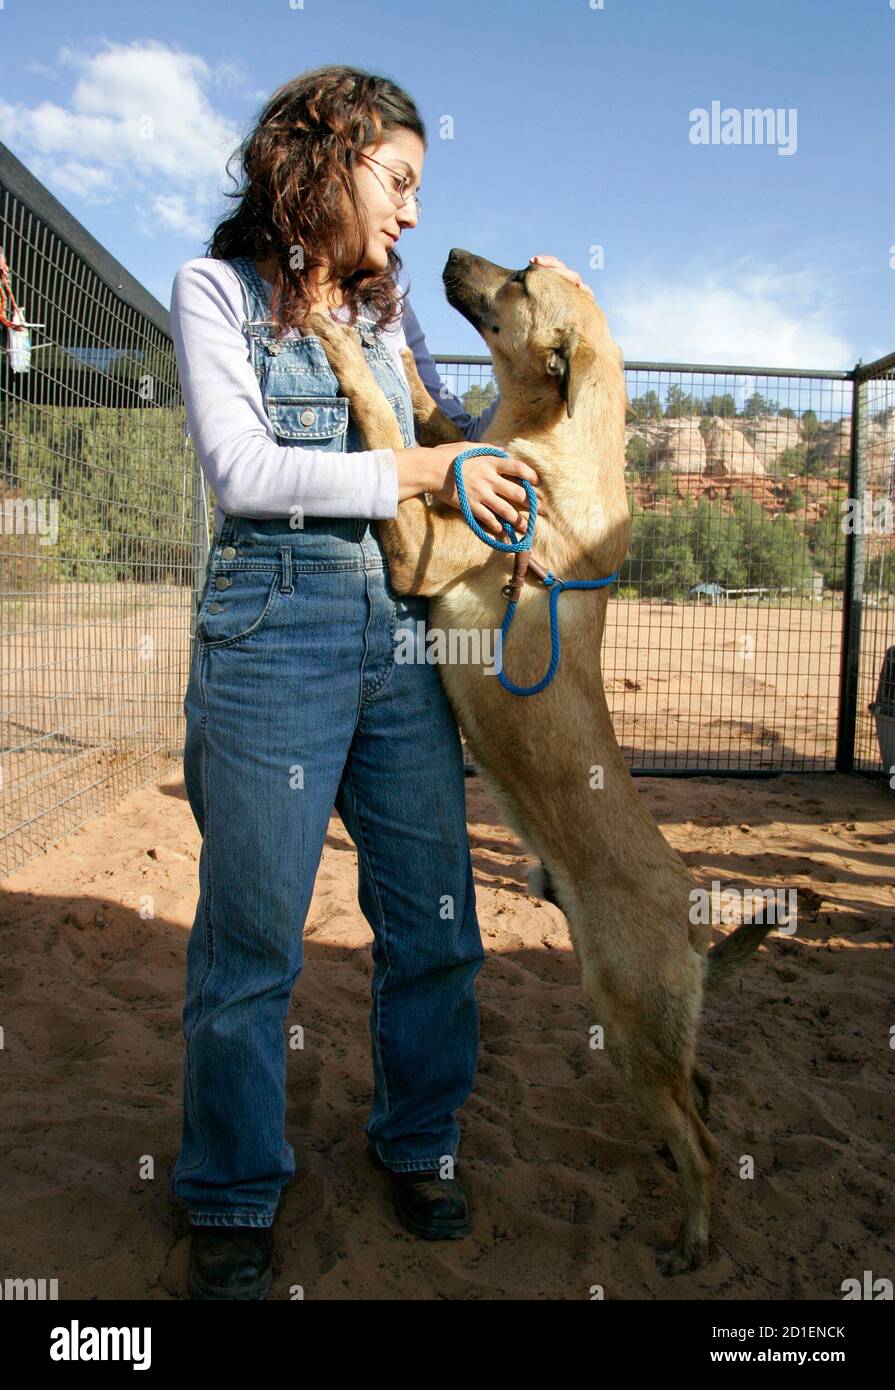 Safa Hojeij, one of the founders of Beirut for the Ethical Treatment of Animals (BETA), pets a dog named 'Ringo' before moving him to a kennel at the Best Friends Animal Sanctuary near Kanab, Utah September 26, 2006. About 300 dogs and cats, displaced by the recent war between Israel and Hizbollah, were transported from Lebanon by cargo jet and and truck to the sanctuary. The rescue program was organized by the Best Friends Animal Society after BETA was overwhelmed with displaced pets, organizers said. REUTERS/Steve Marcus (UNITED STATES) Stock Photo